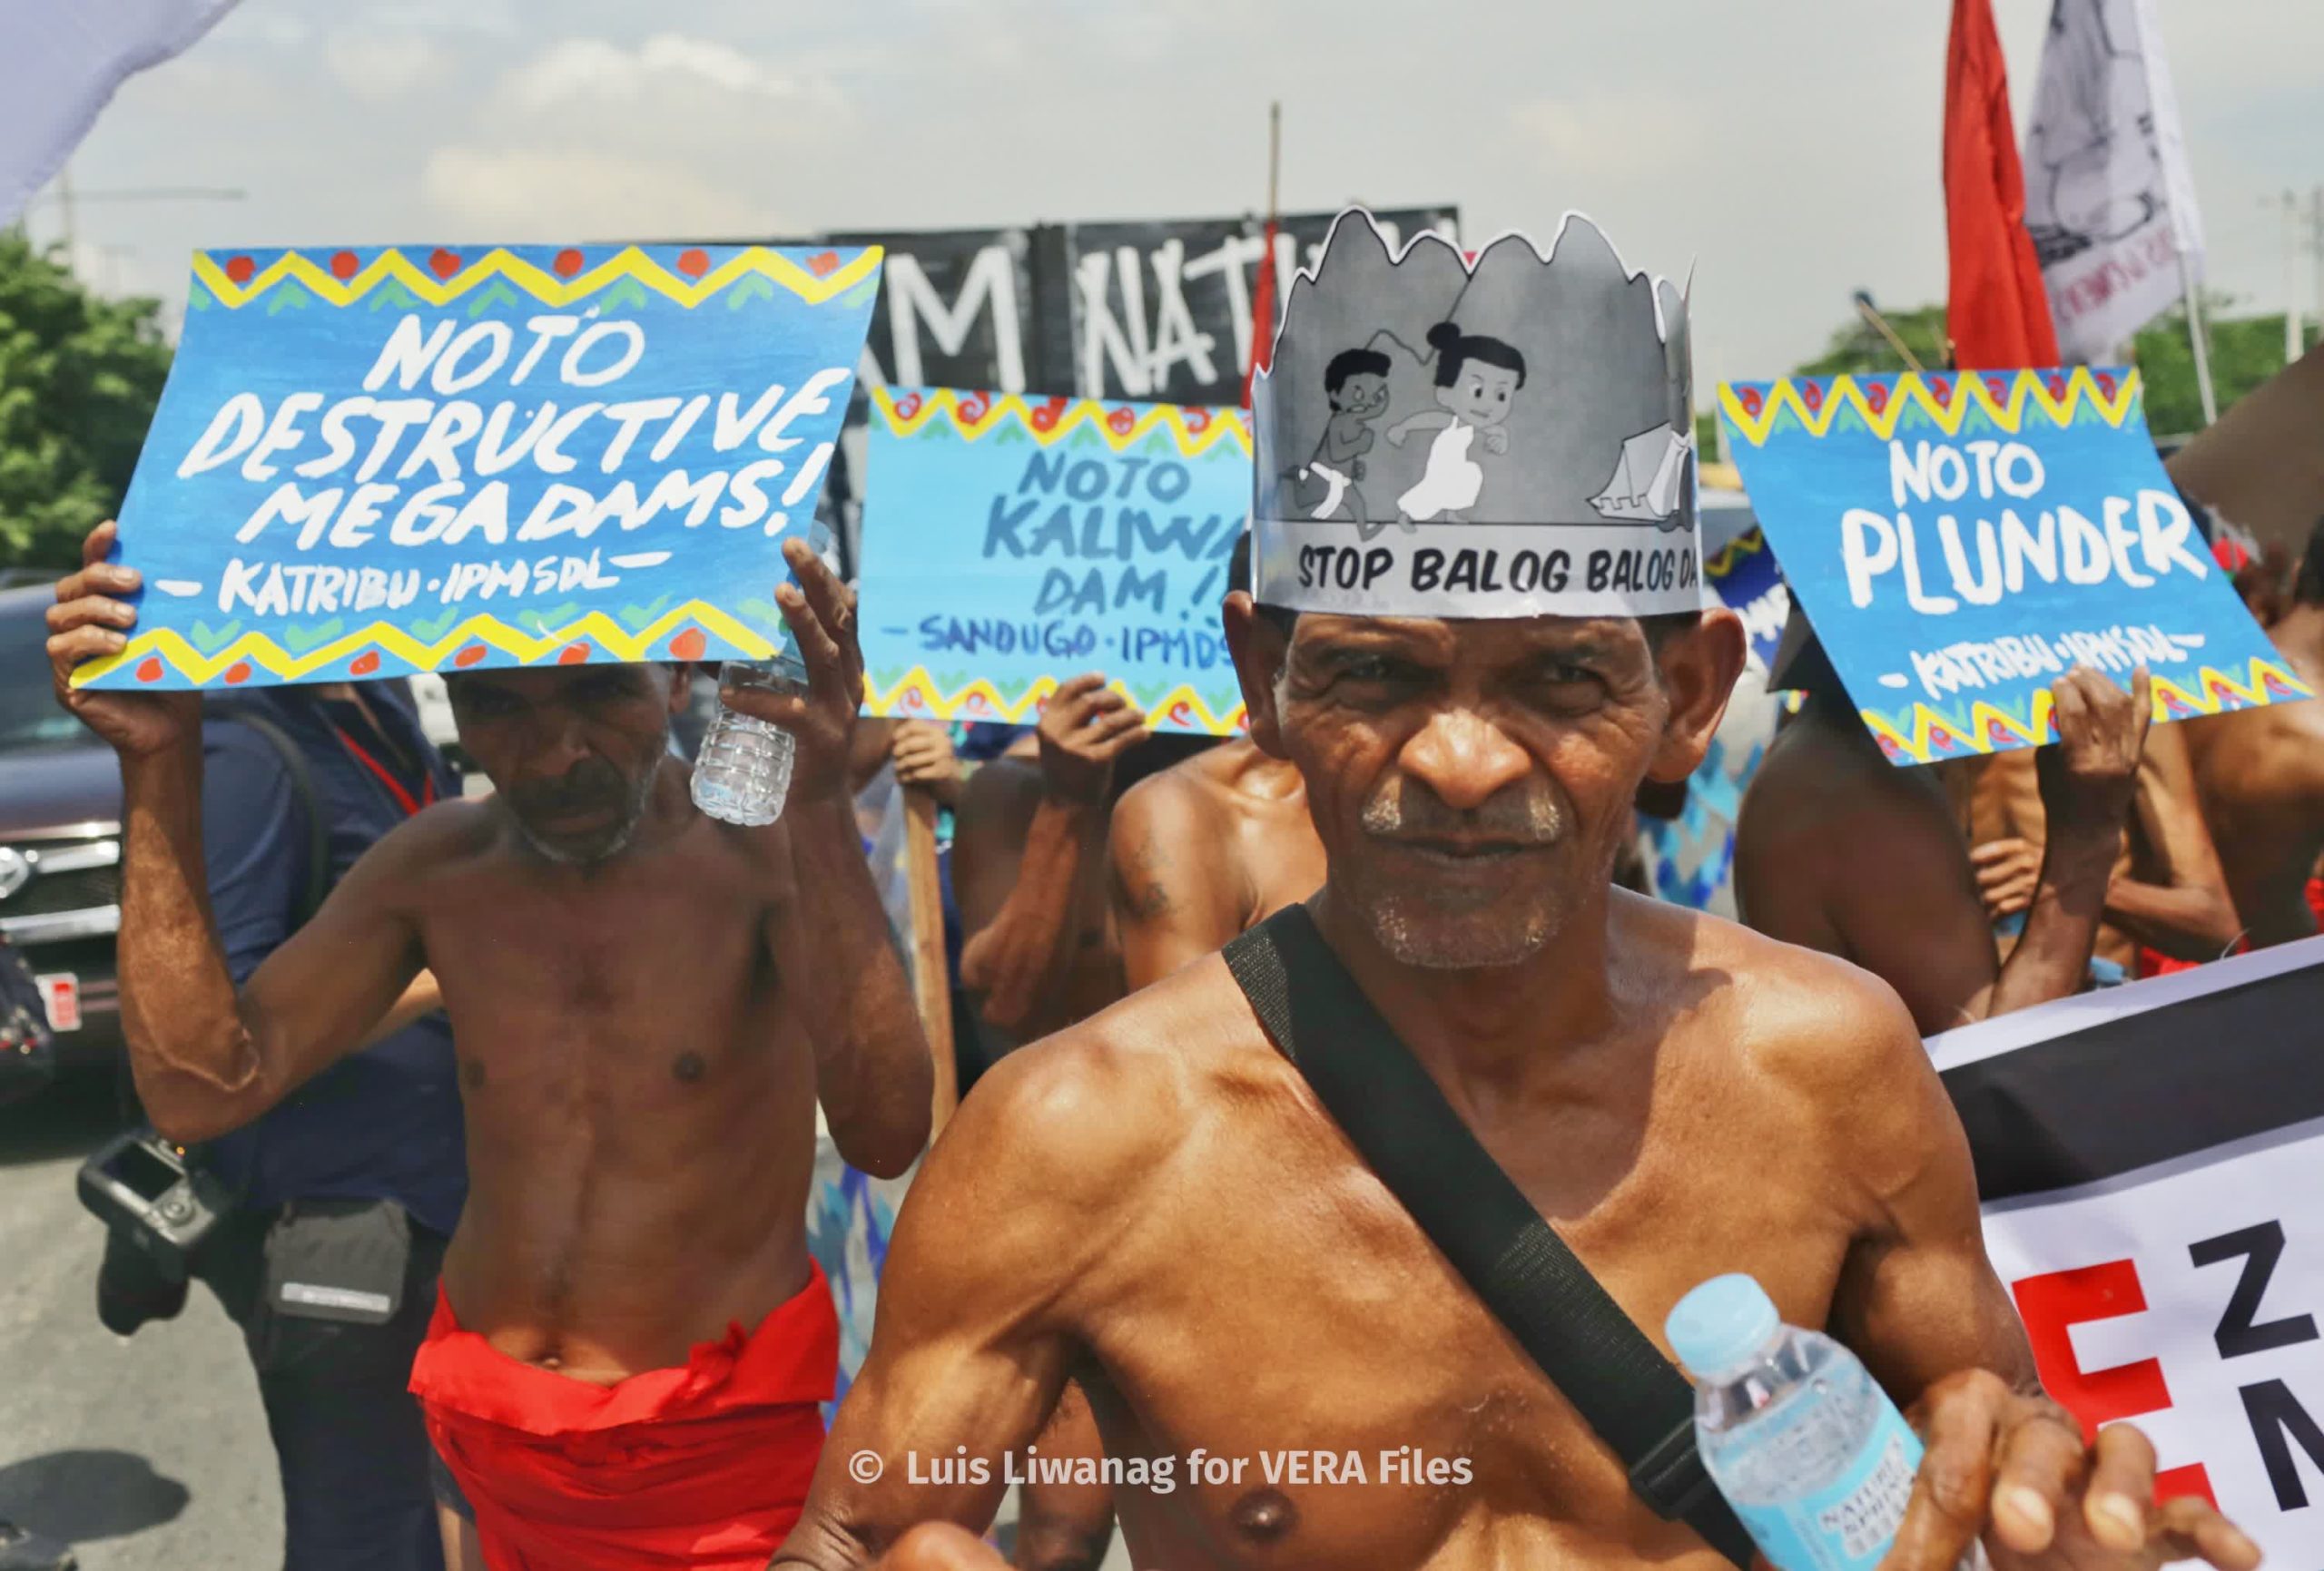 Impassioned protests counter Duterte’s SONA 2/12 Photos by Luis Liwanag